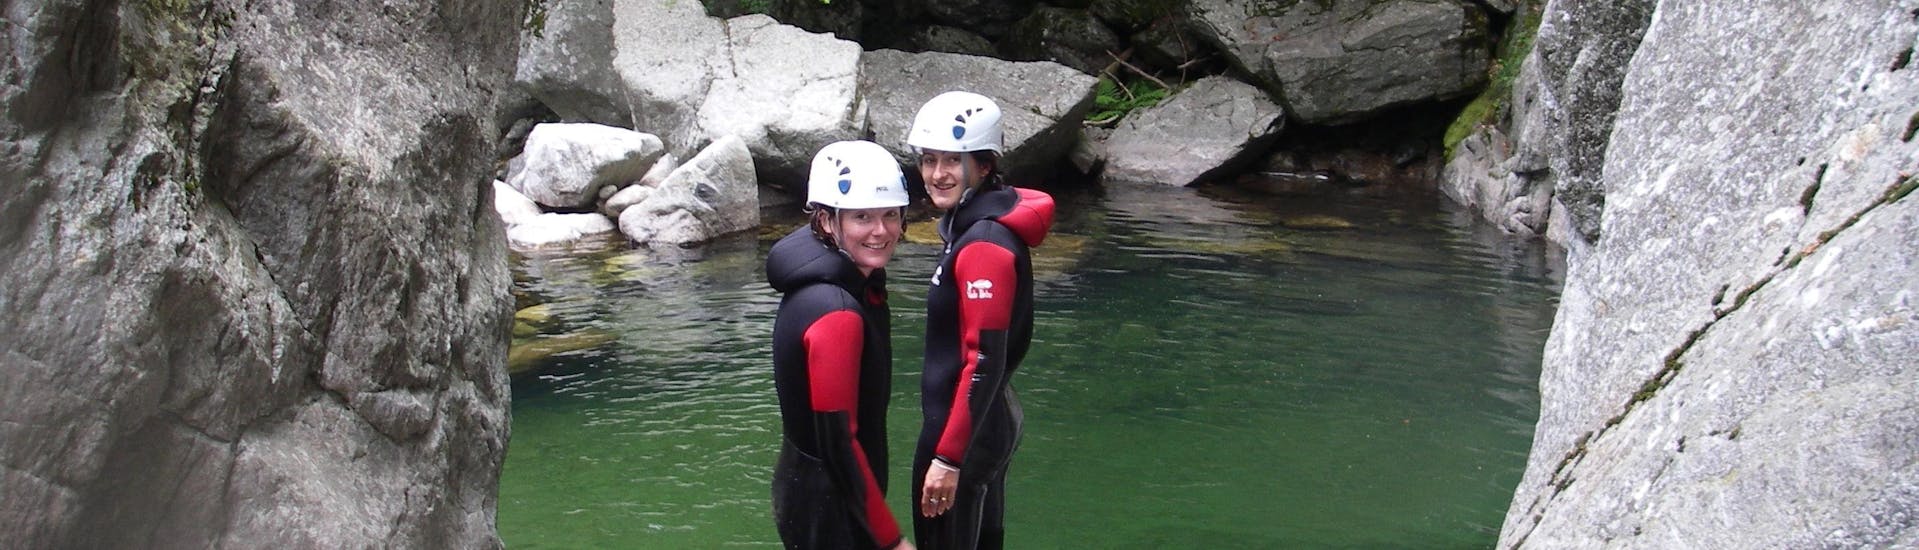 Two friends are getting ready to jump in an emerald pool during their Aquatic Canyoning in Canyon de la Borne with Geo Ardèche Canyon.